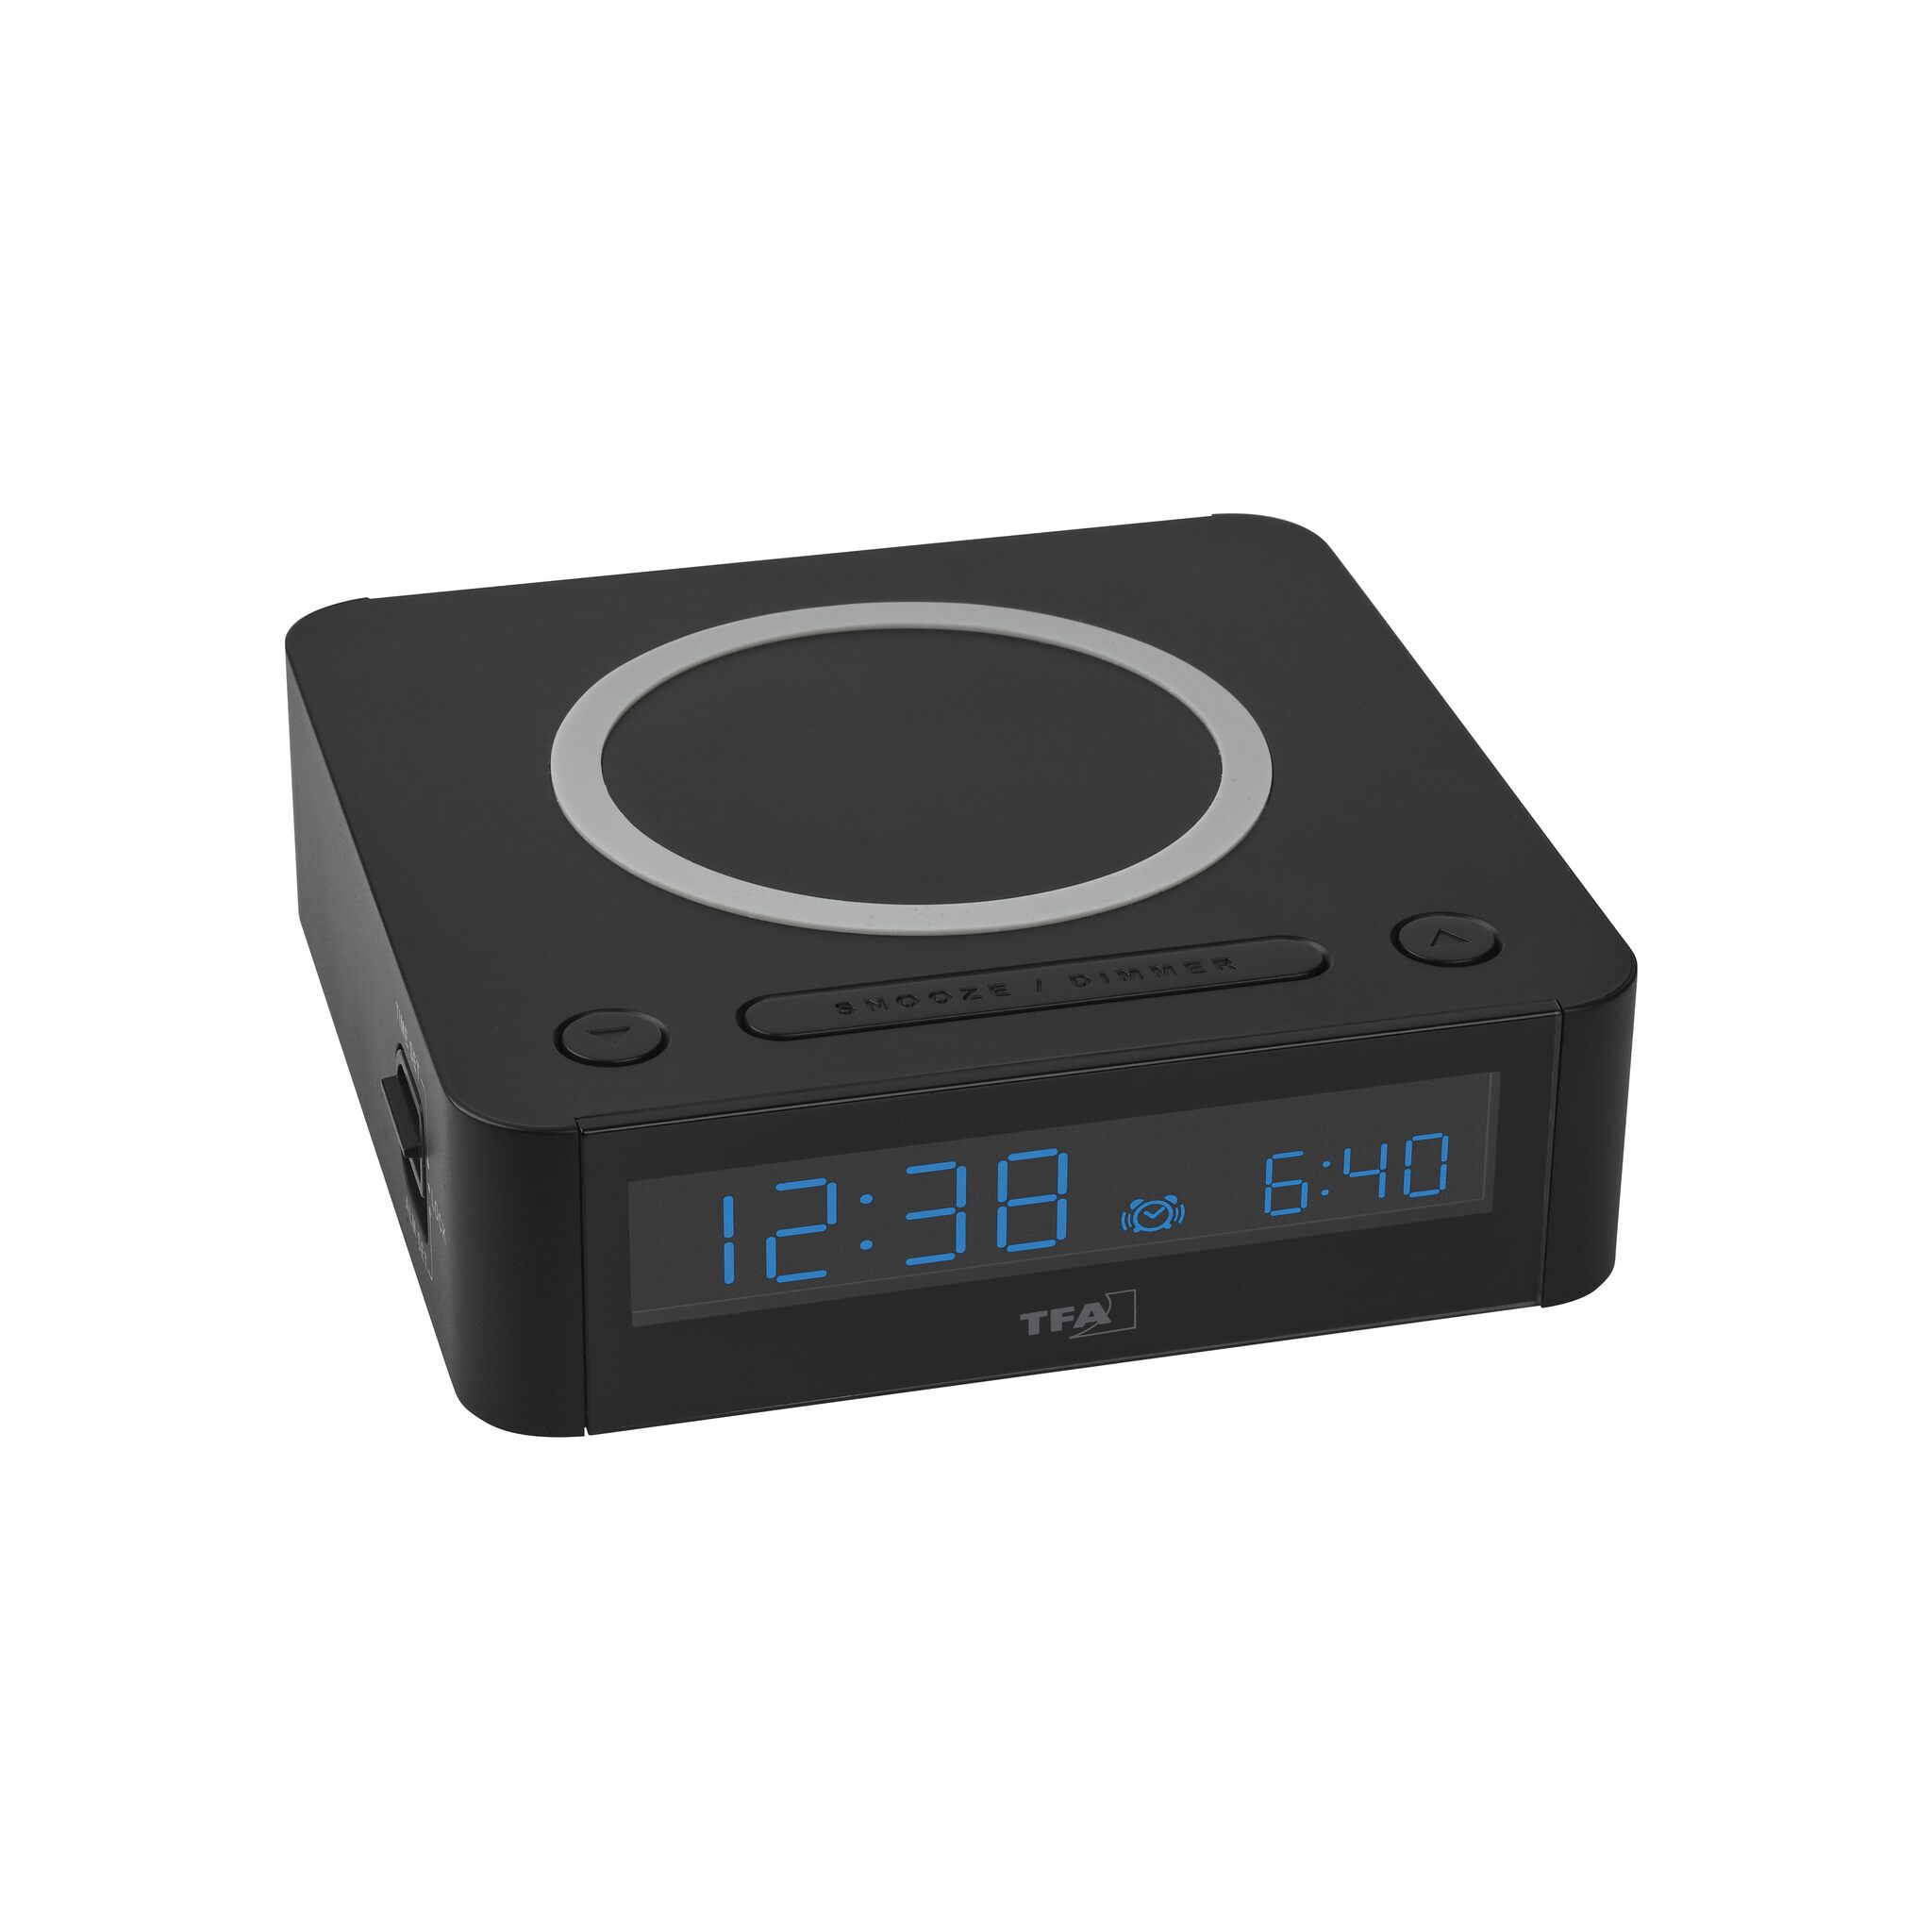 Digital alarm clock with wireless charging station